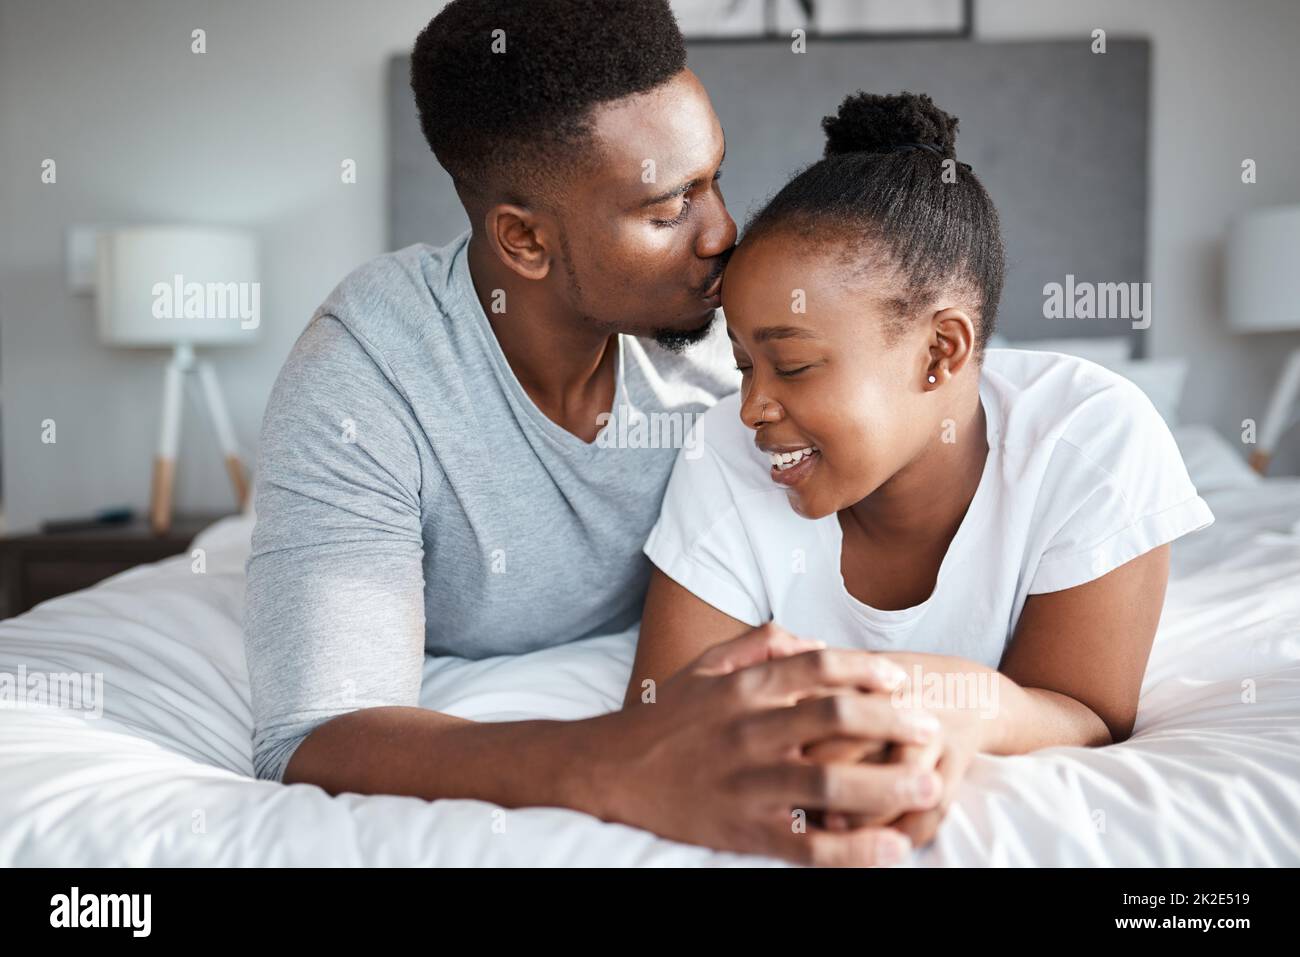 Nothing beats the feeling of being in love and being loved. Shot of an affectionate young couple relaxing on their bed together at home. Stock Photo